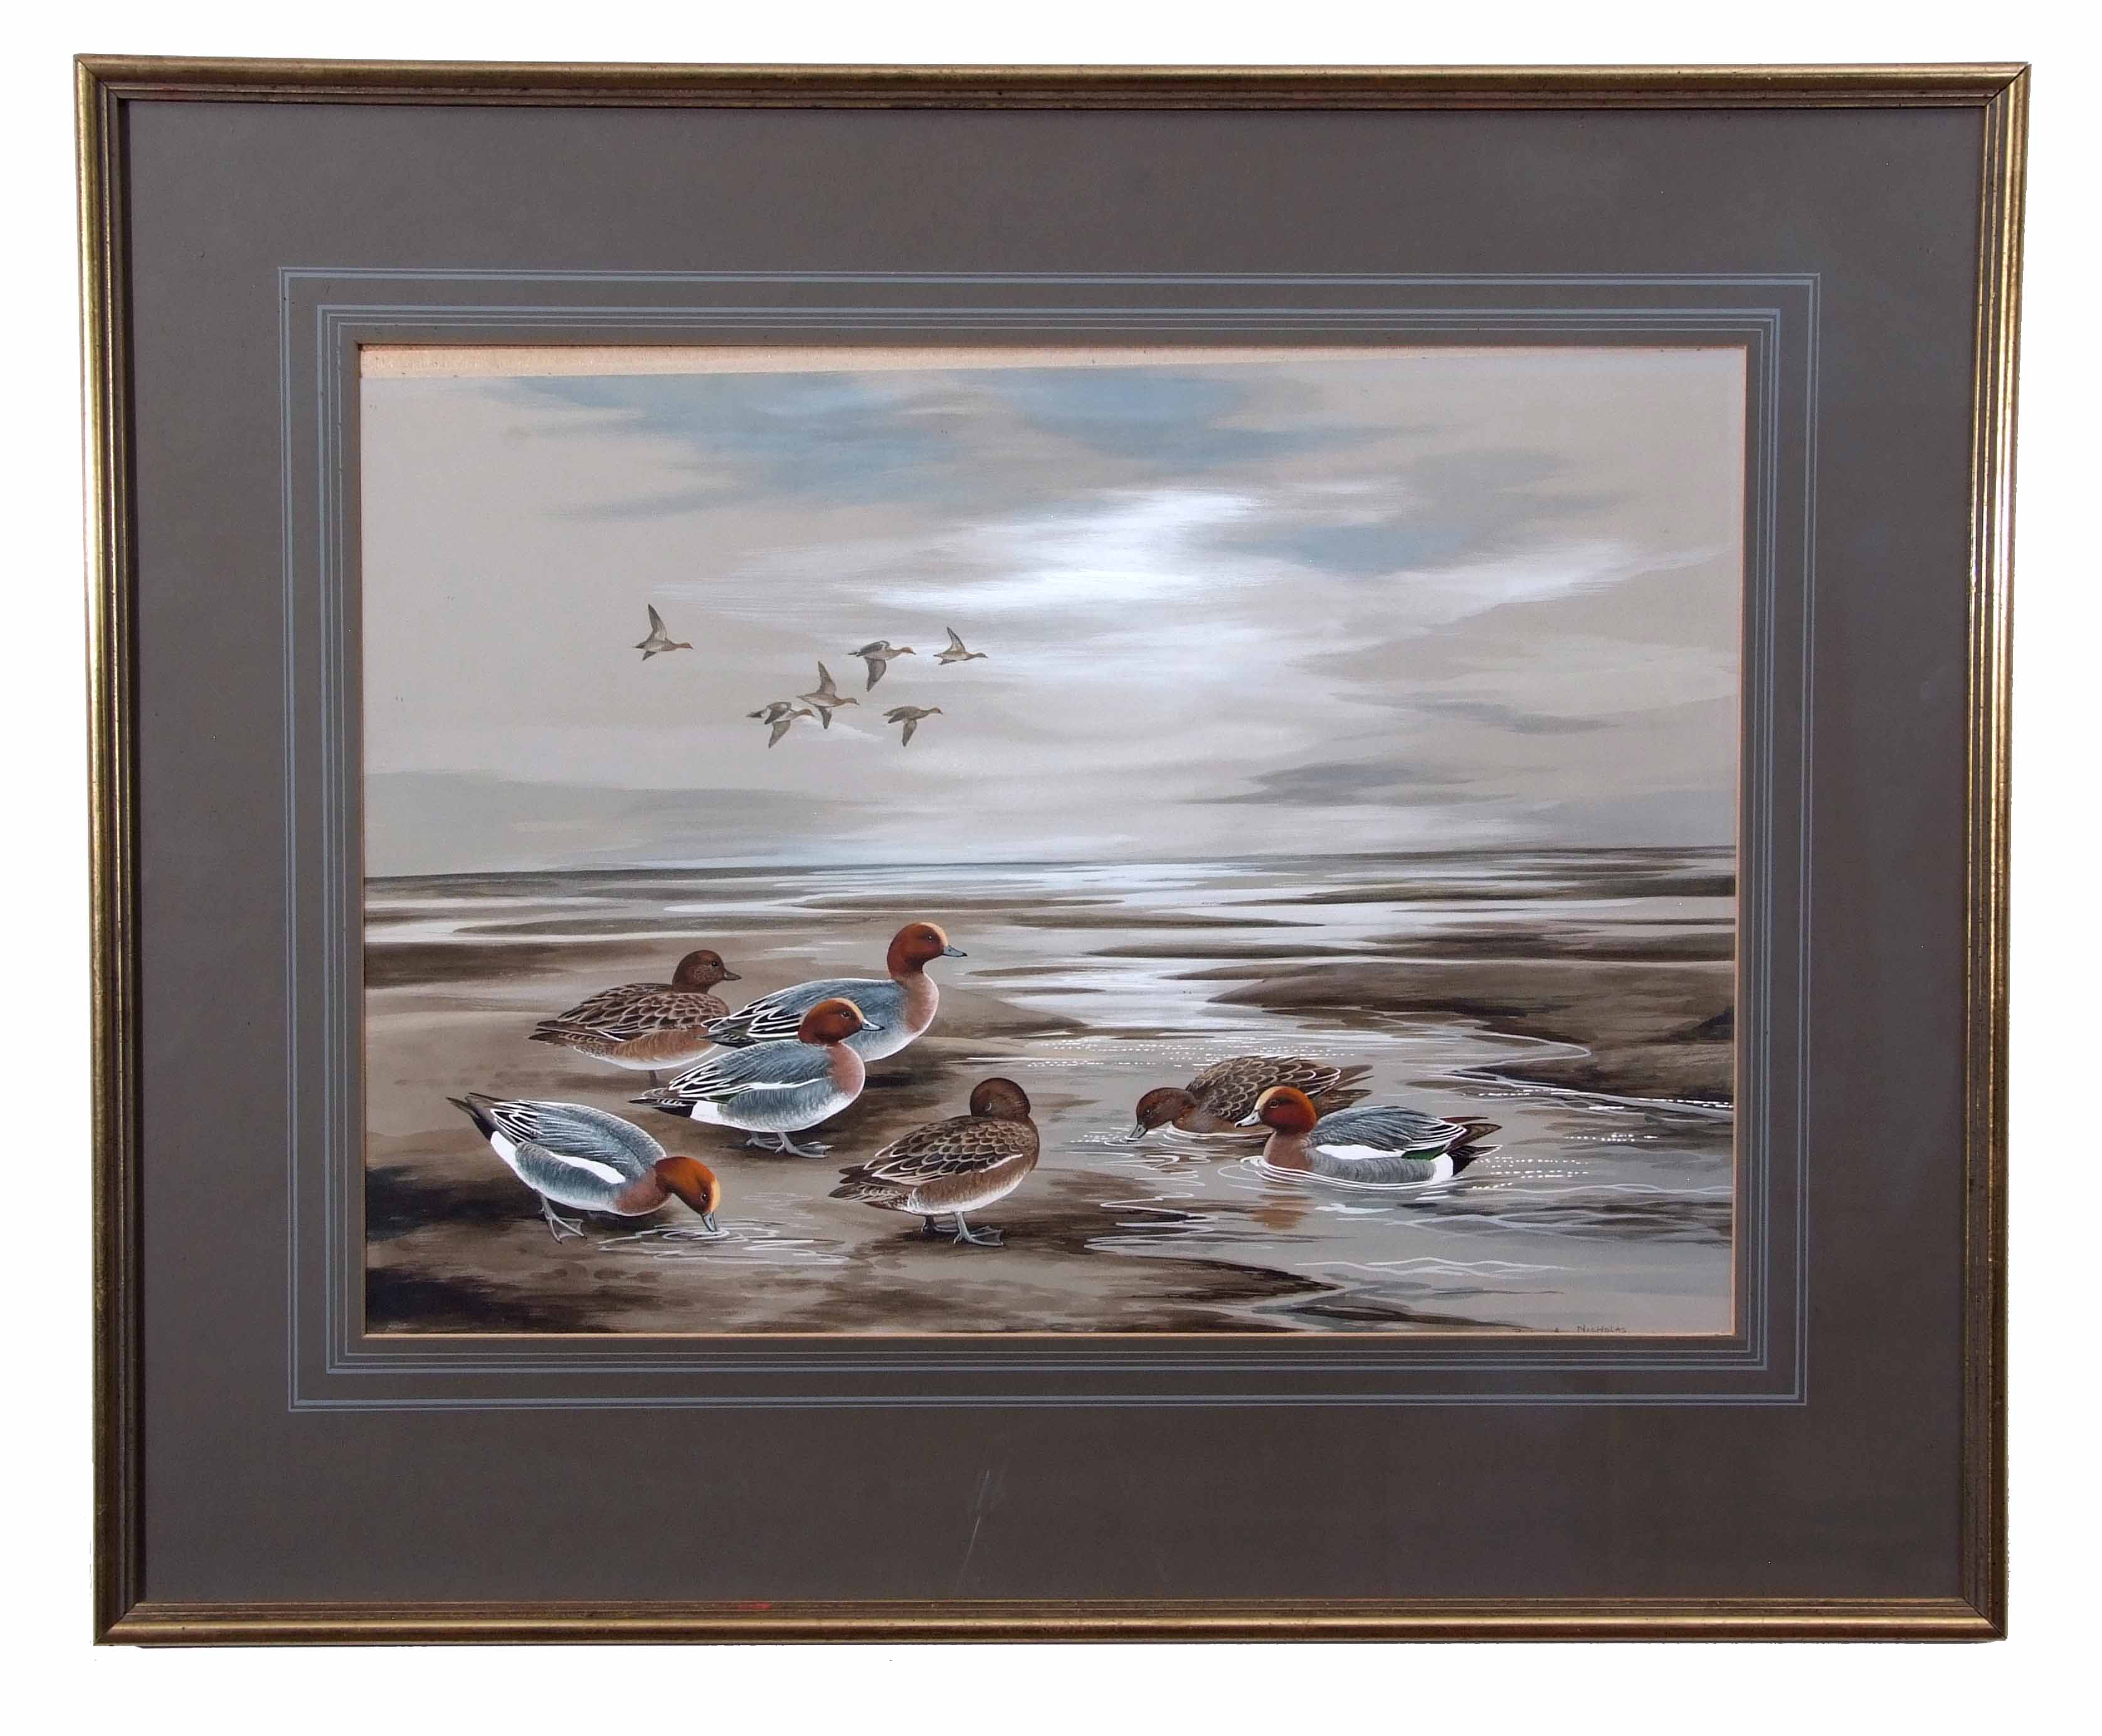 AR Paul A Nicholas (20th century), Widgeon in an estuary, watercolour and gouache, signed lower - Image 2 of 2